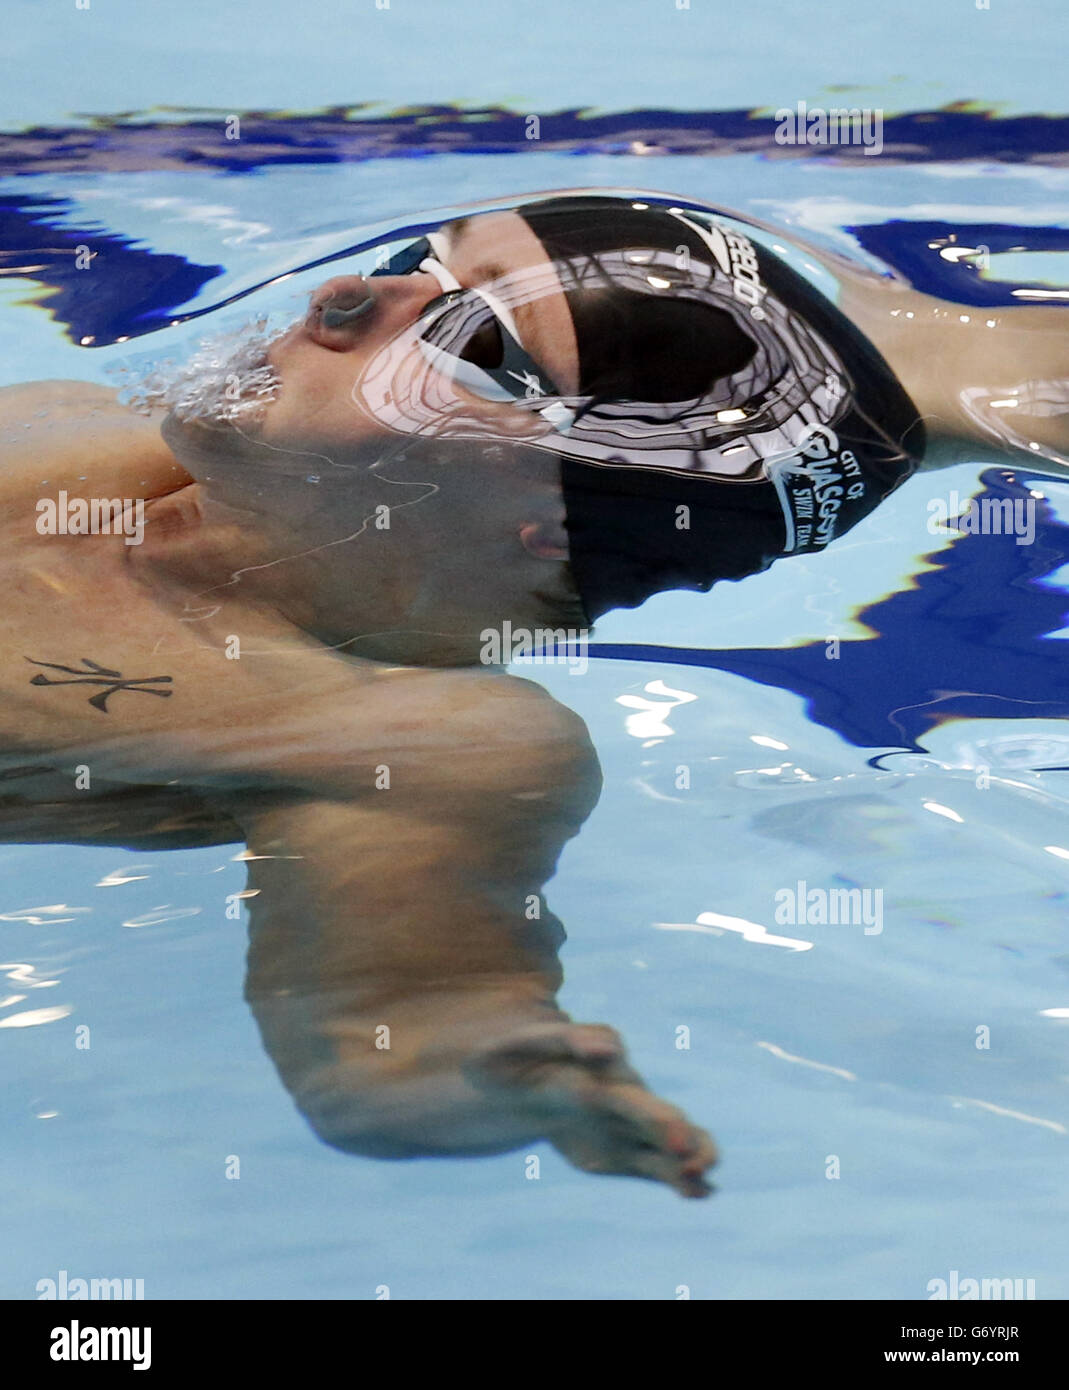 Robert Renwick competes in the Mens Open 100m Backstroke heat 3 during the 2014 British Gas Swimming Championships at Tollcross International Swimming Centre, Glasgow. PRESS ASSOCIATION Photo. Picture date: Thursday April 10, 2014. Photo credit should read: Danny Lawson/PA Wire Stock Photo